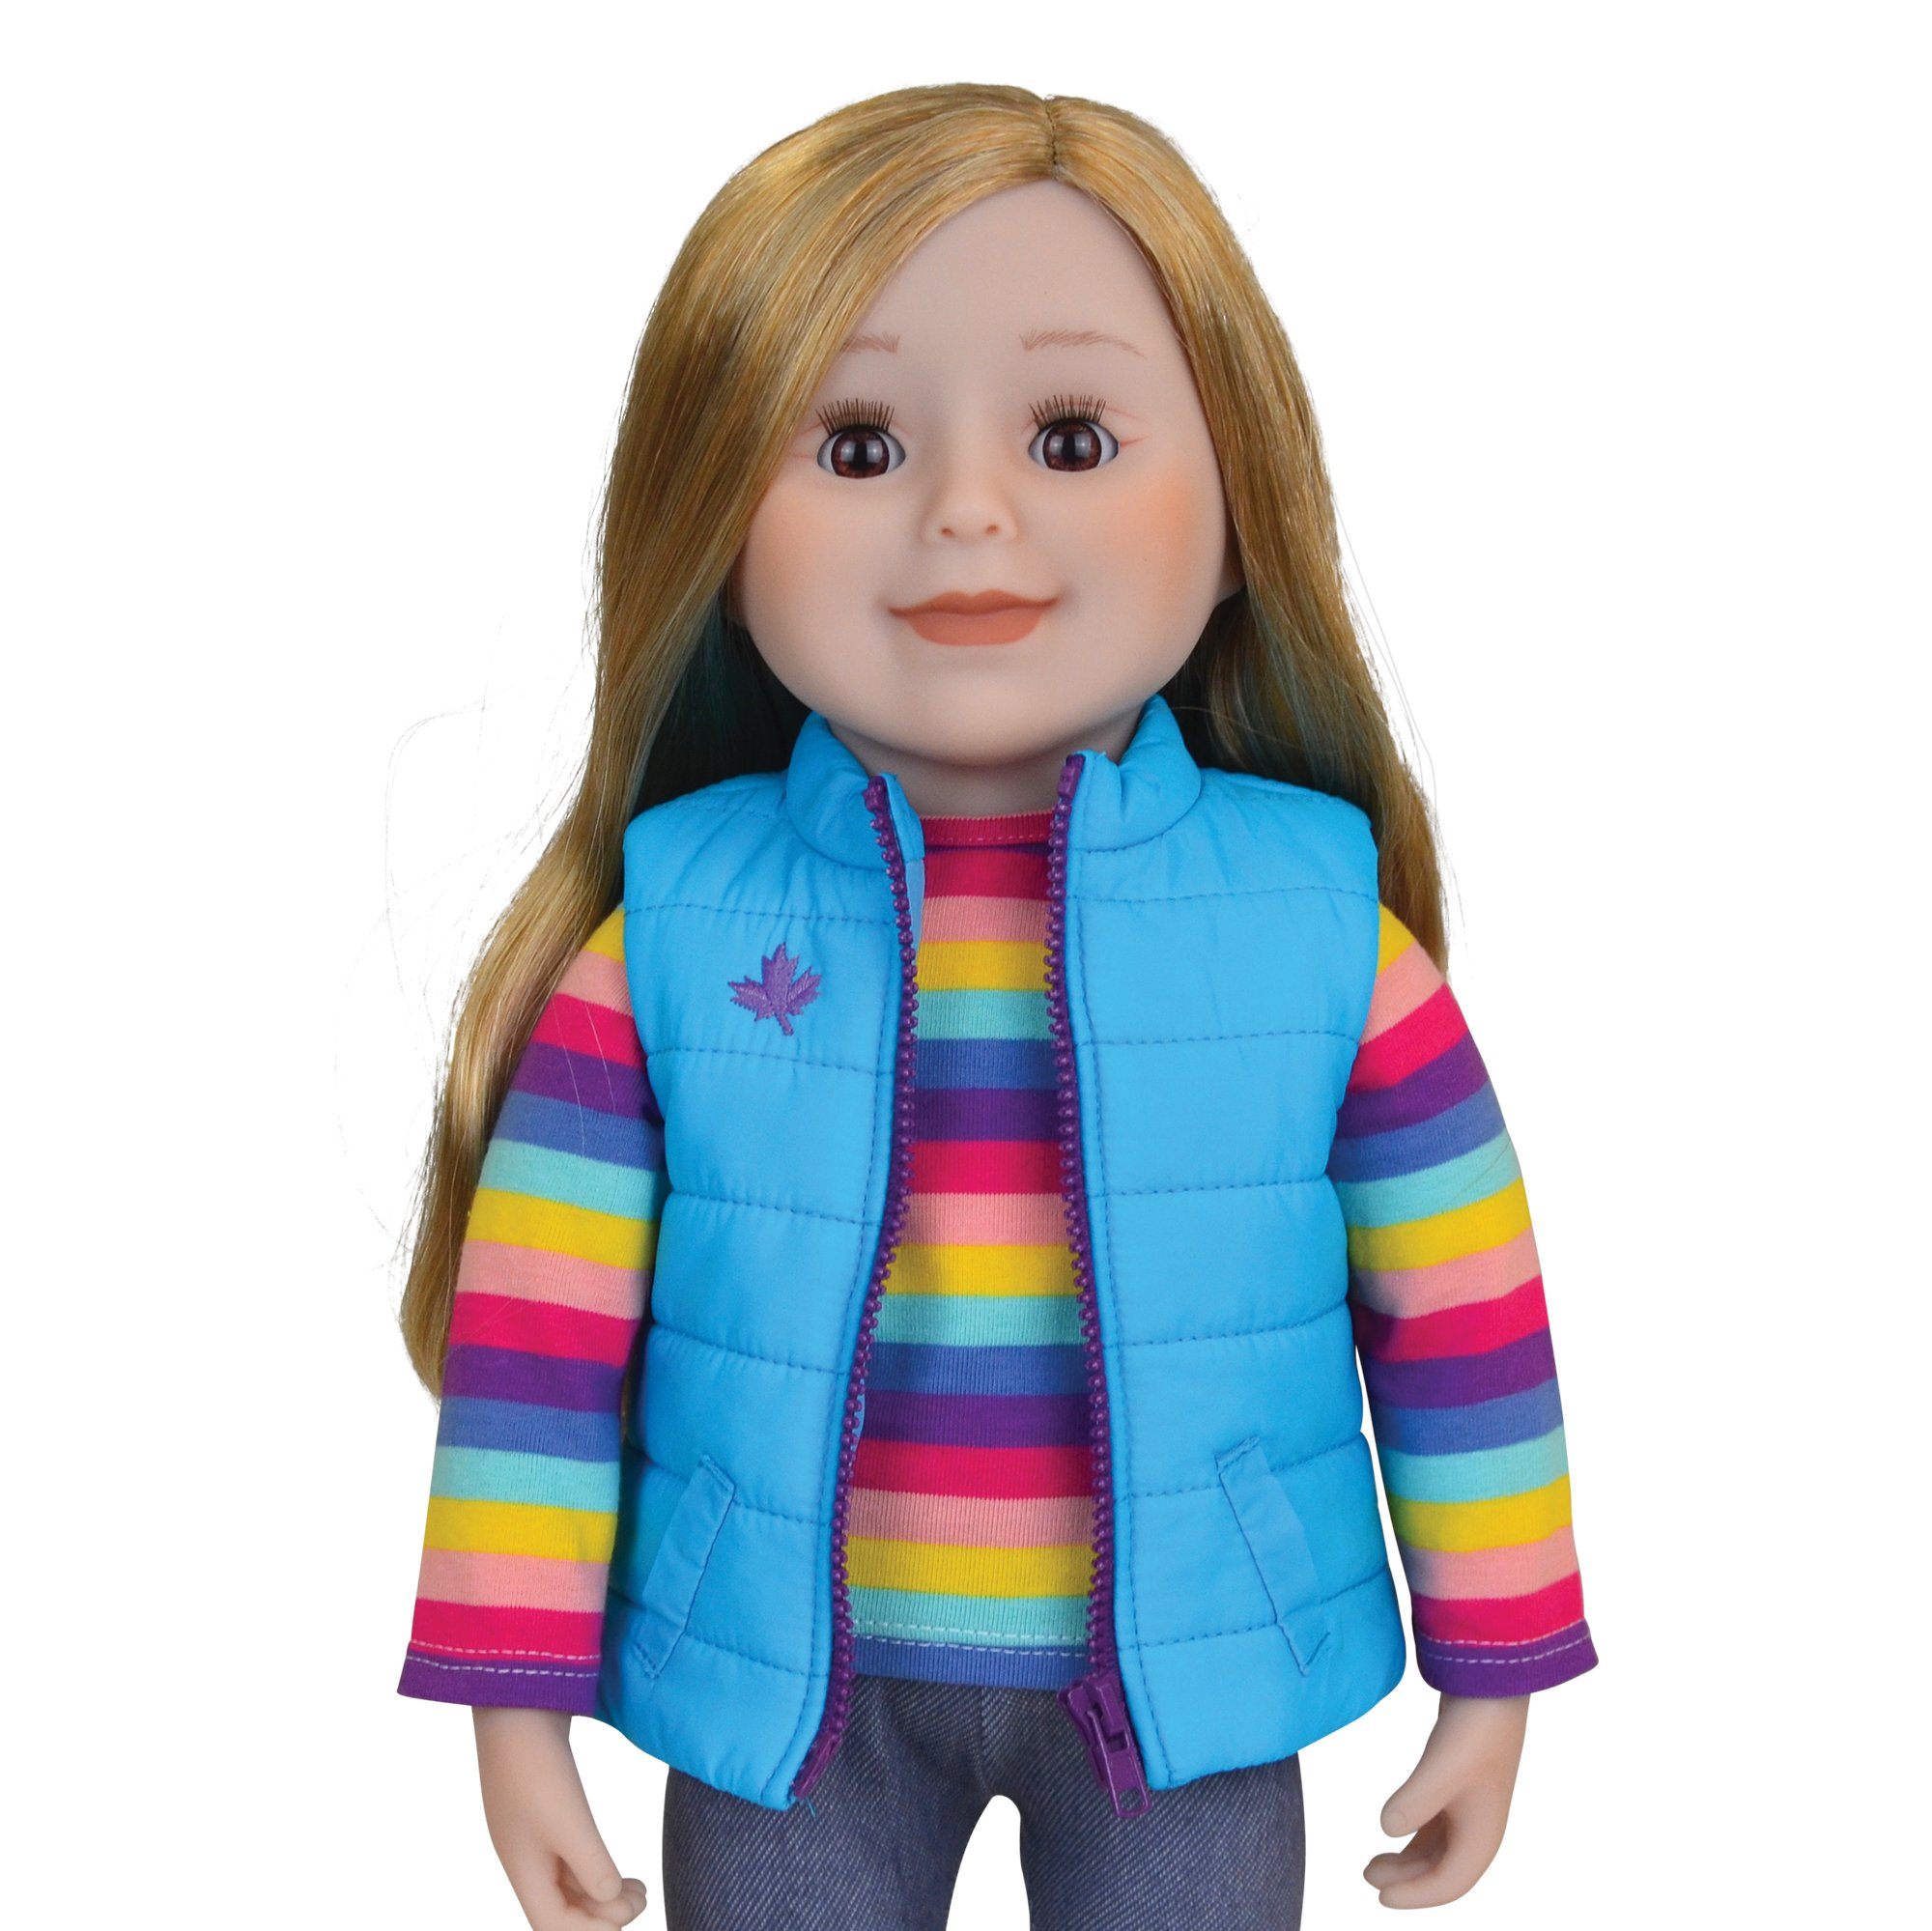 Maplelea 18 inch doll with long blonde blond hair brown eyes and light skin